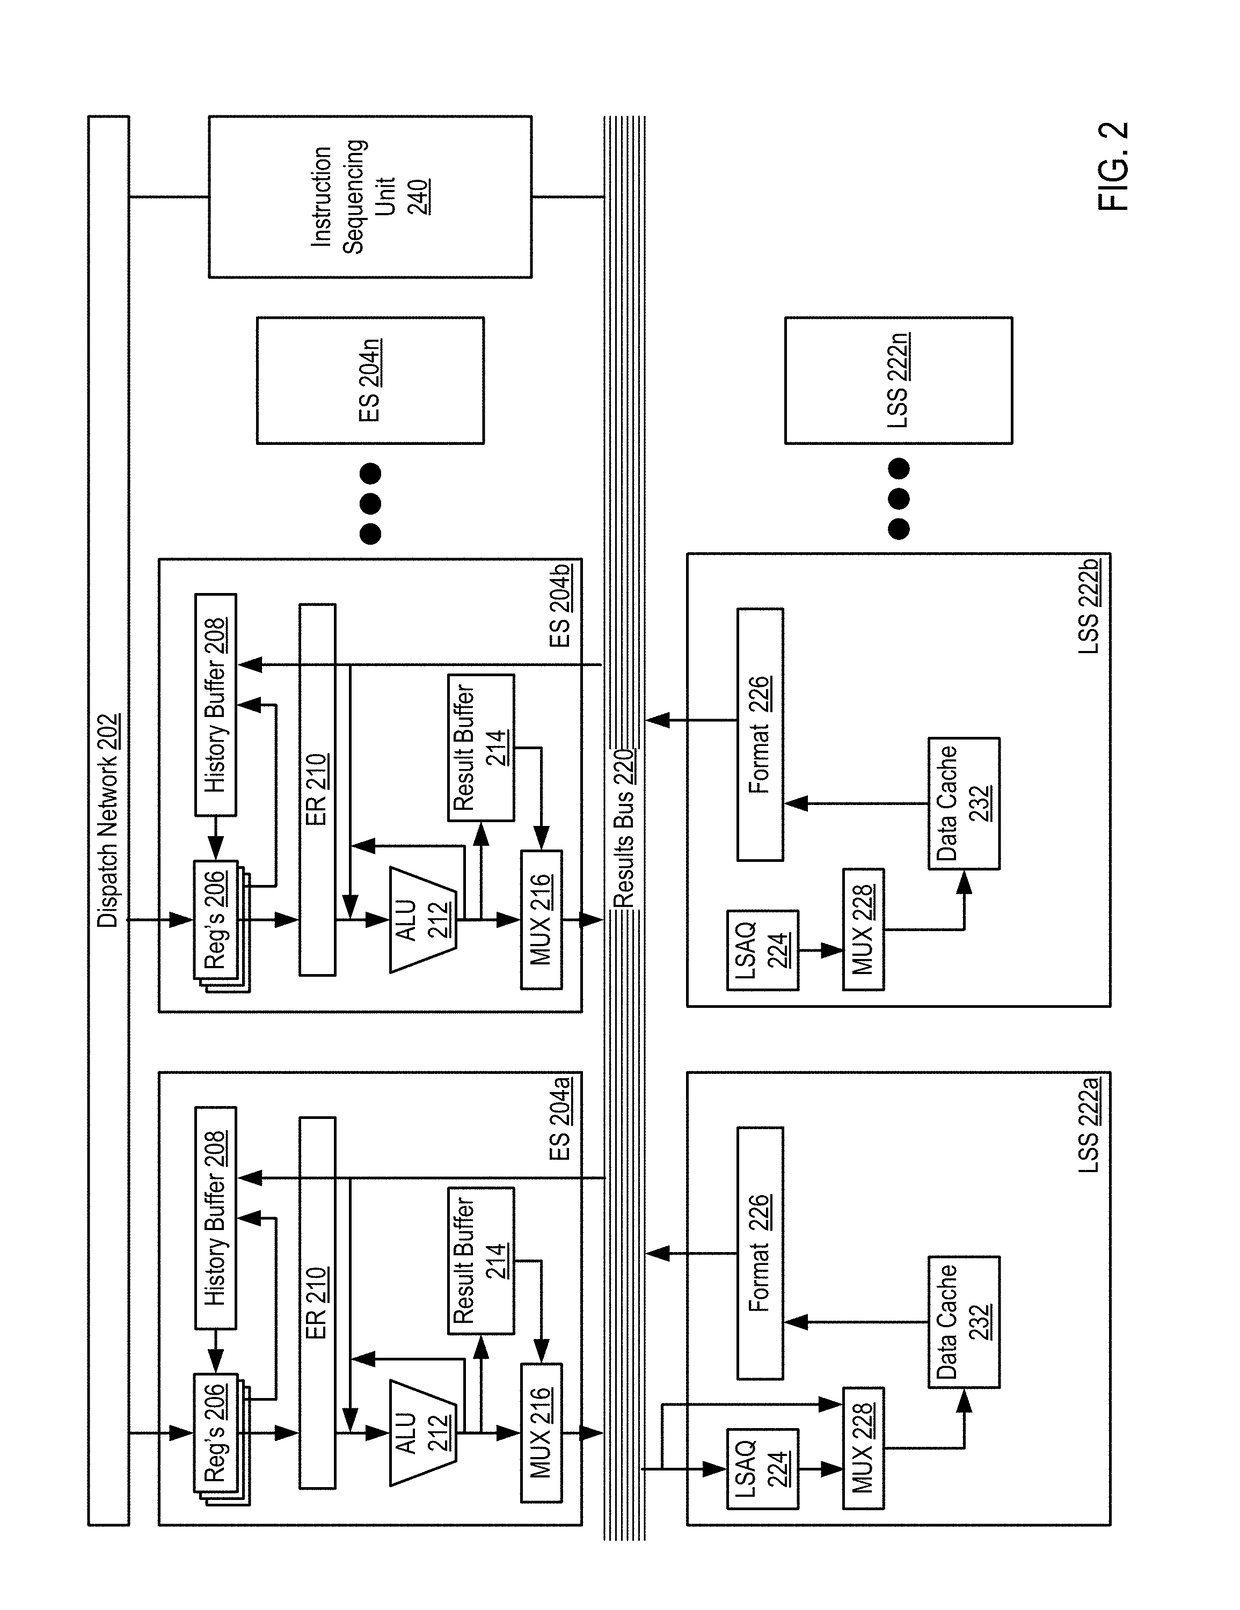 Preventing hazard flushes in an instruction sequencing unit of a multi-slice processor